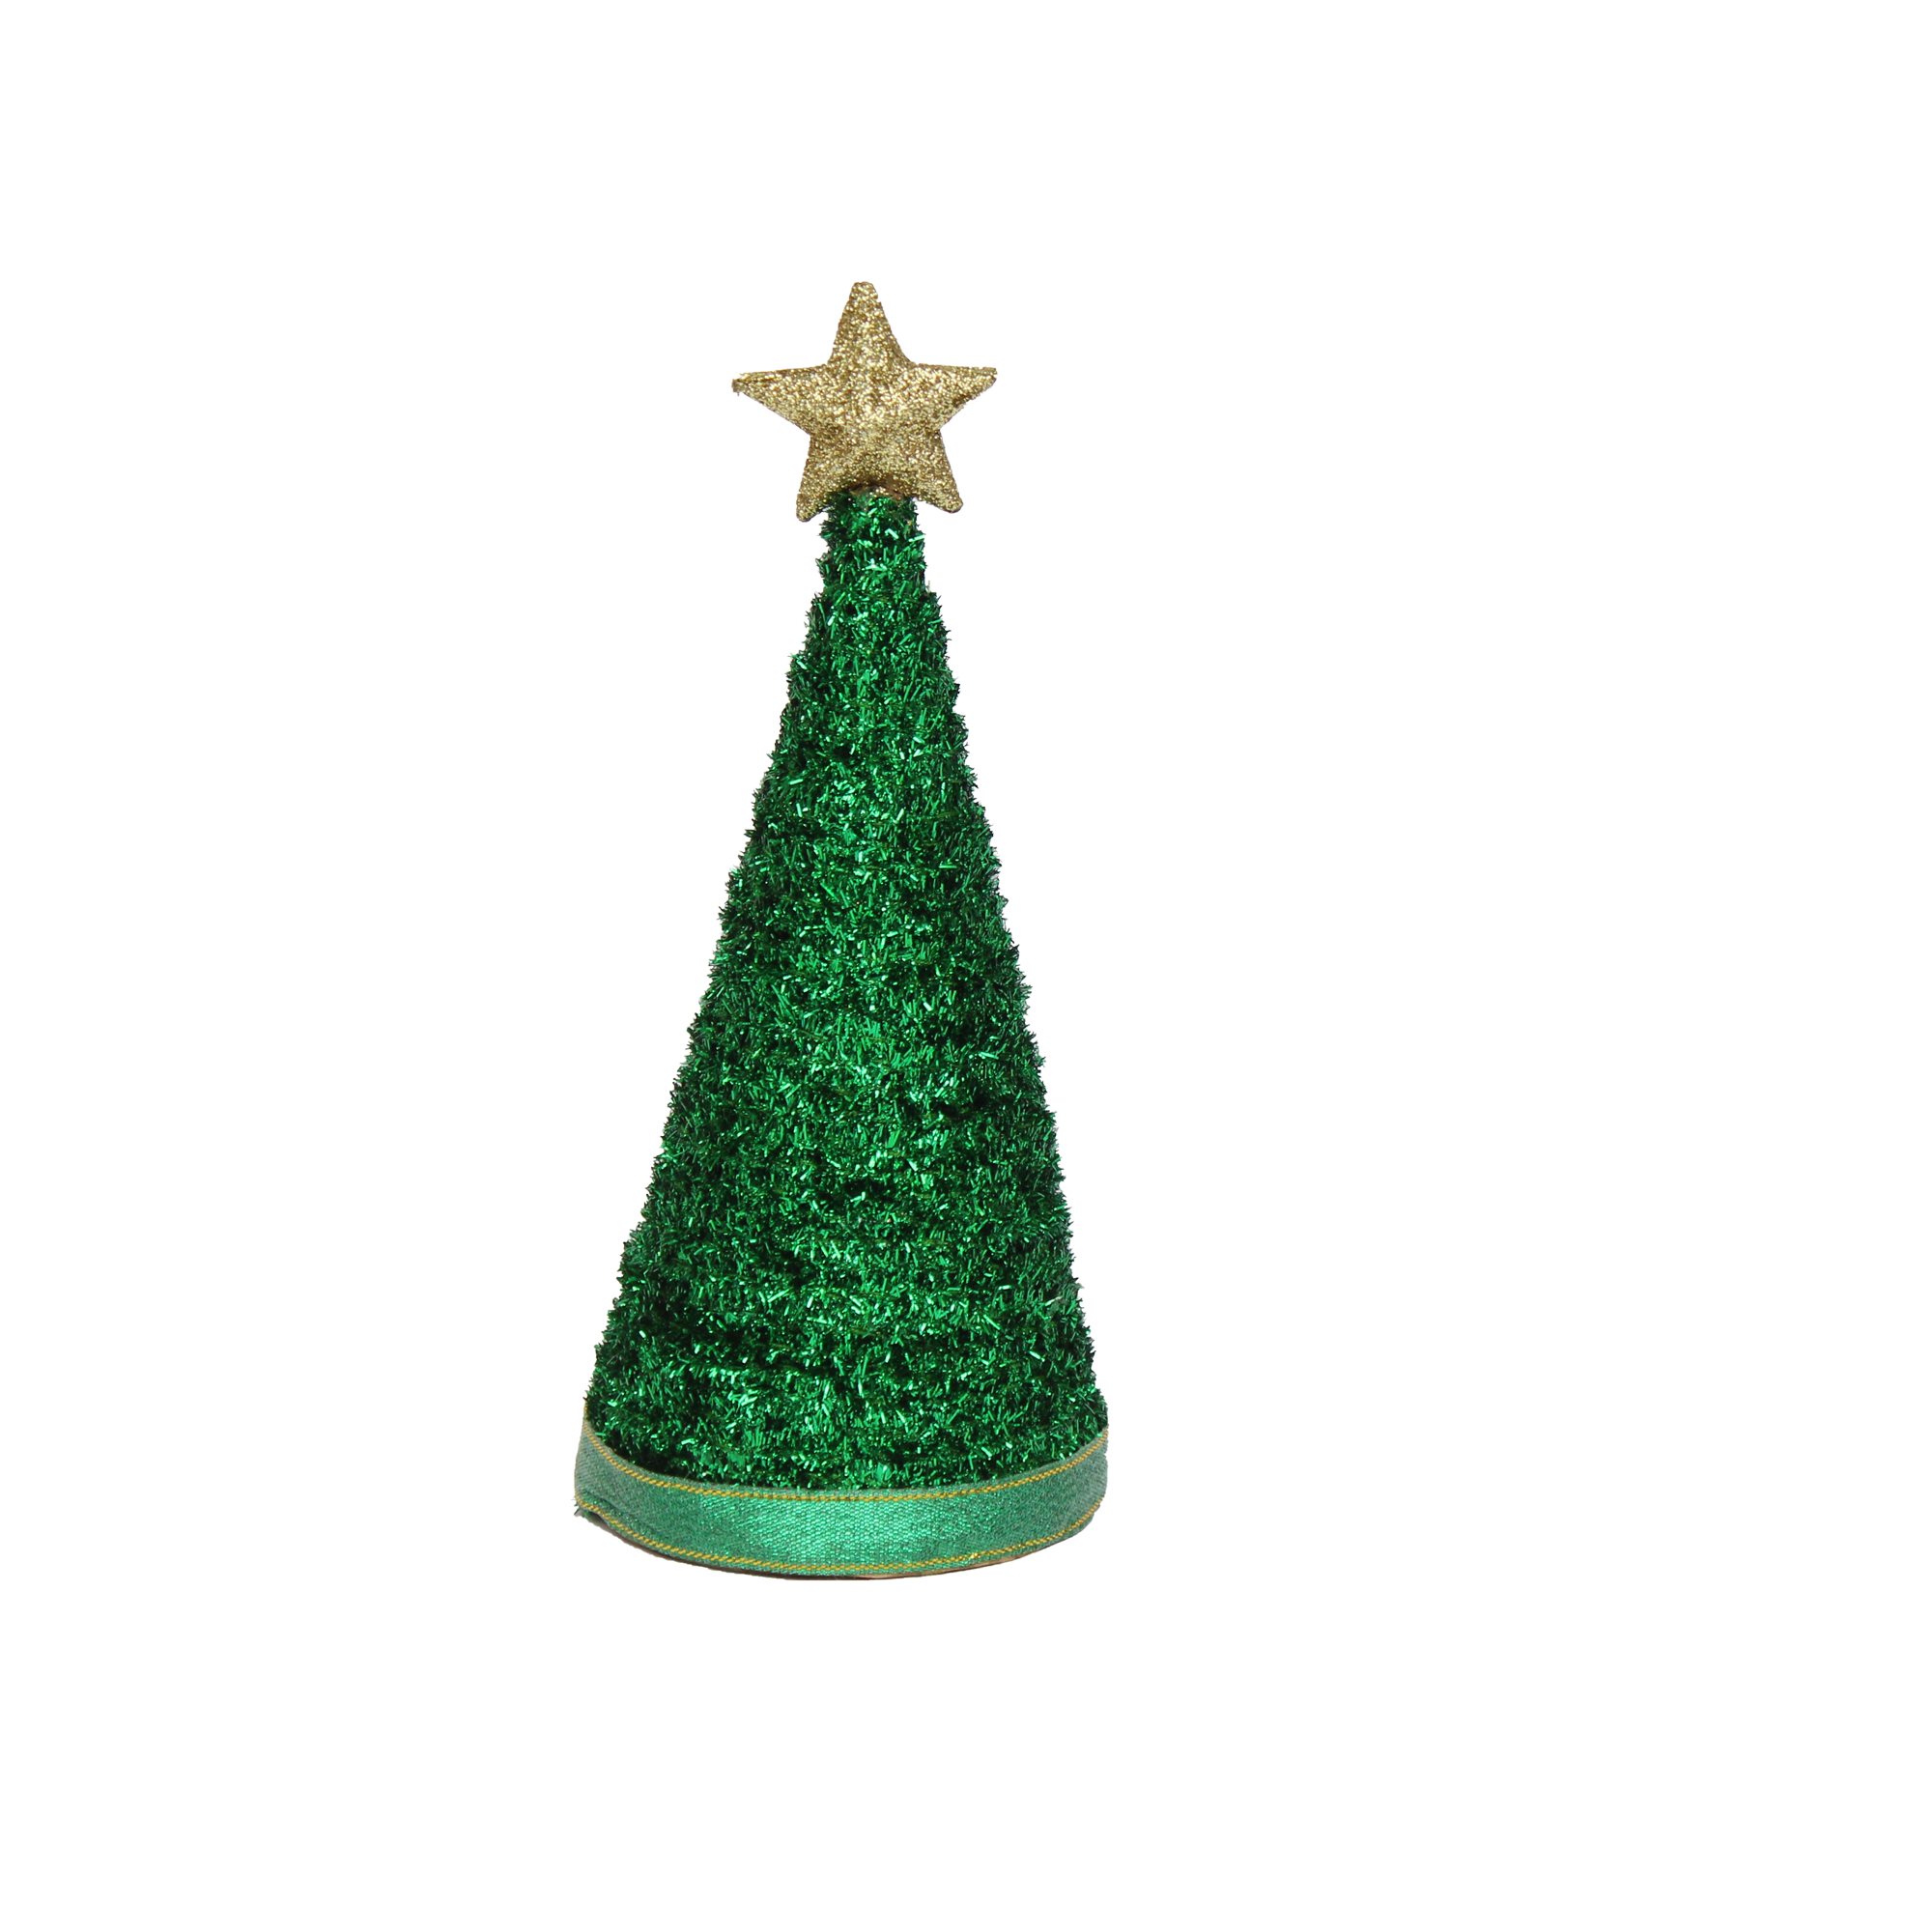 Handmade Conical Christmas Tinsel Tree with Sequins and Star - Height 8 X Width3inch, Green, 1pc